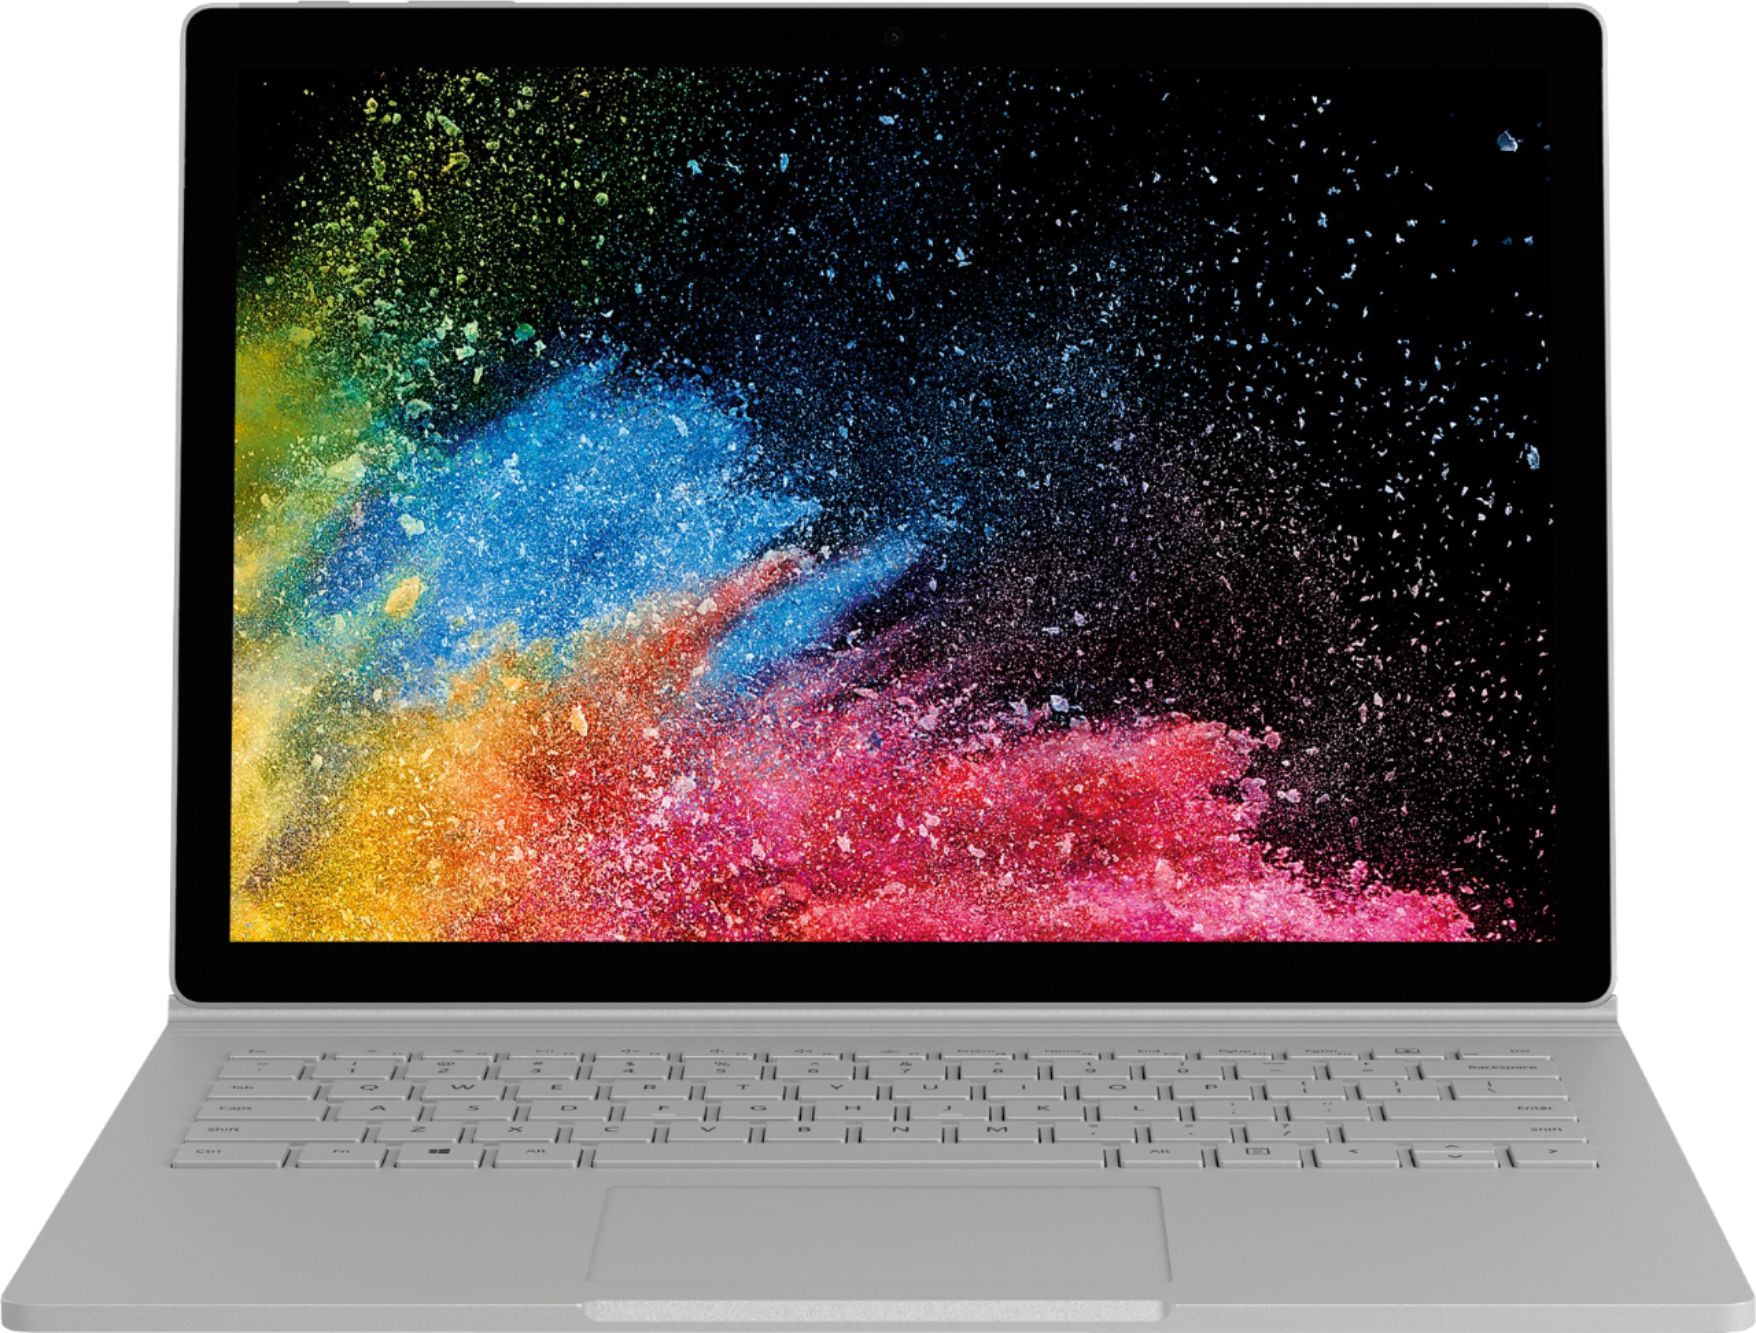 Angle View: Microsoft - Geek Squad Certified Refurbished Surface Book 2 - 13.5" Touch-Screen Laptop - Intel Core i7 - 16GB Memory - 512GB SSD - Silver